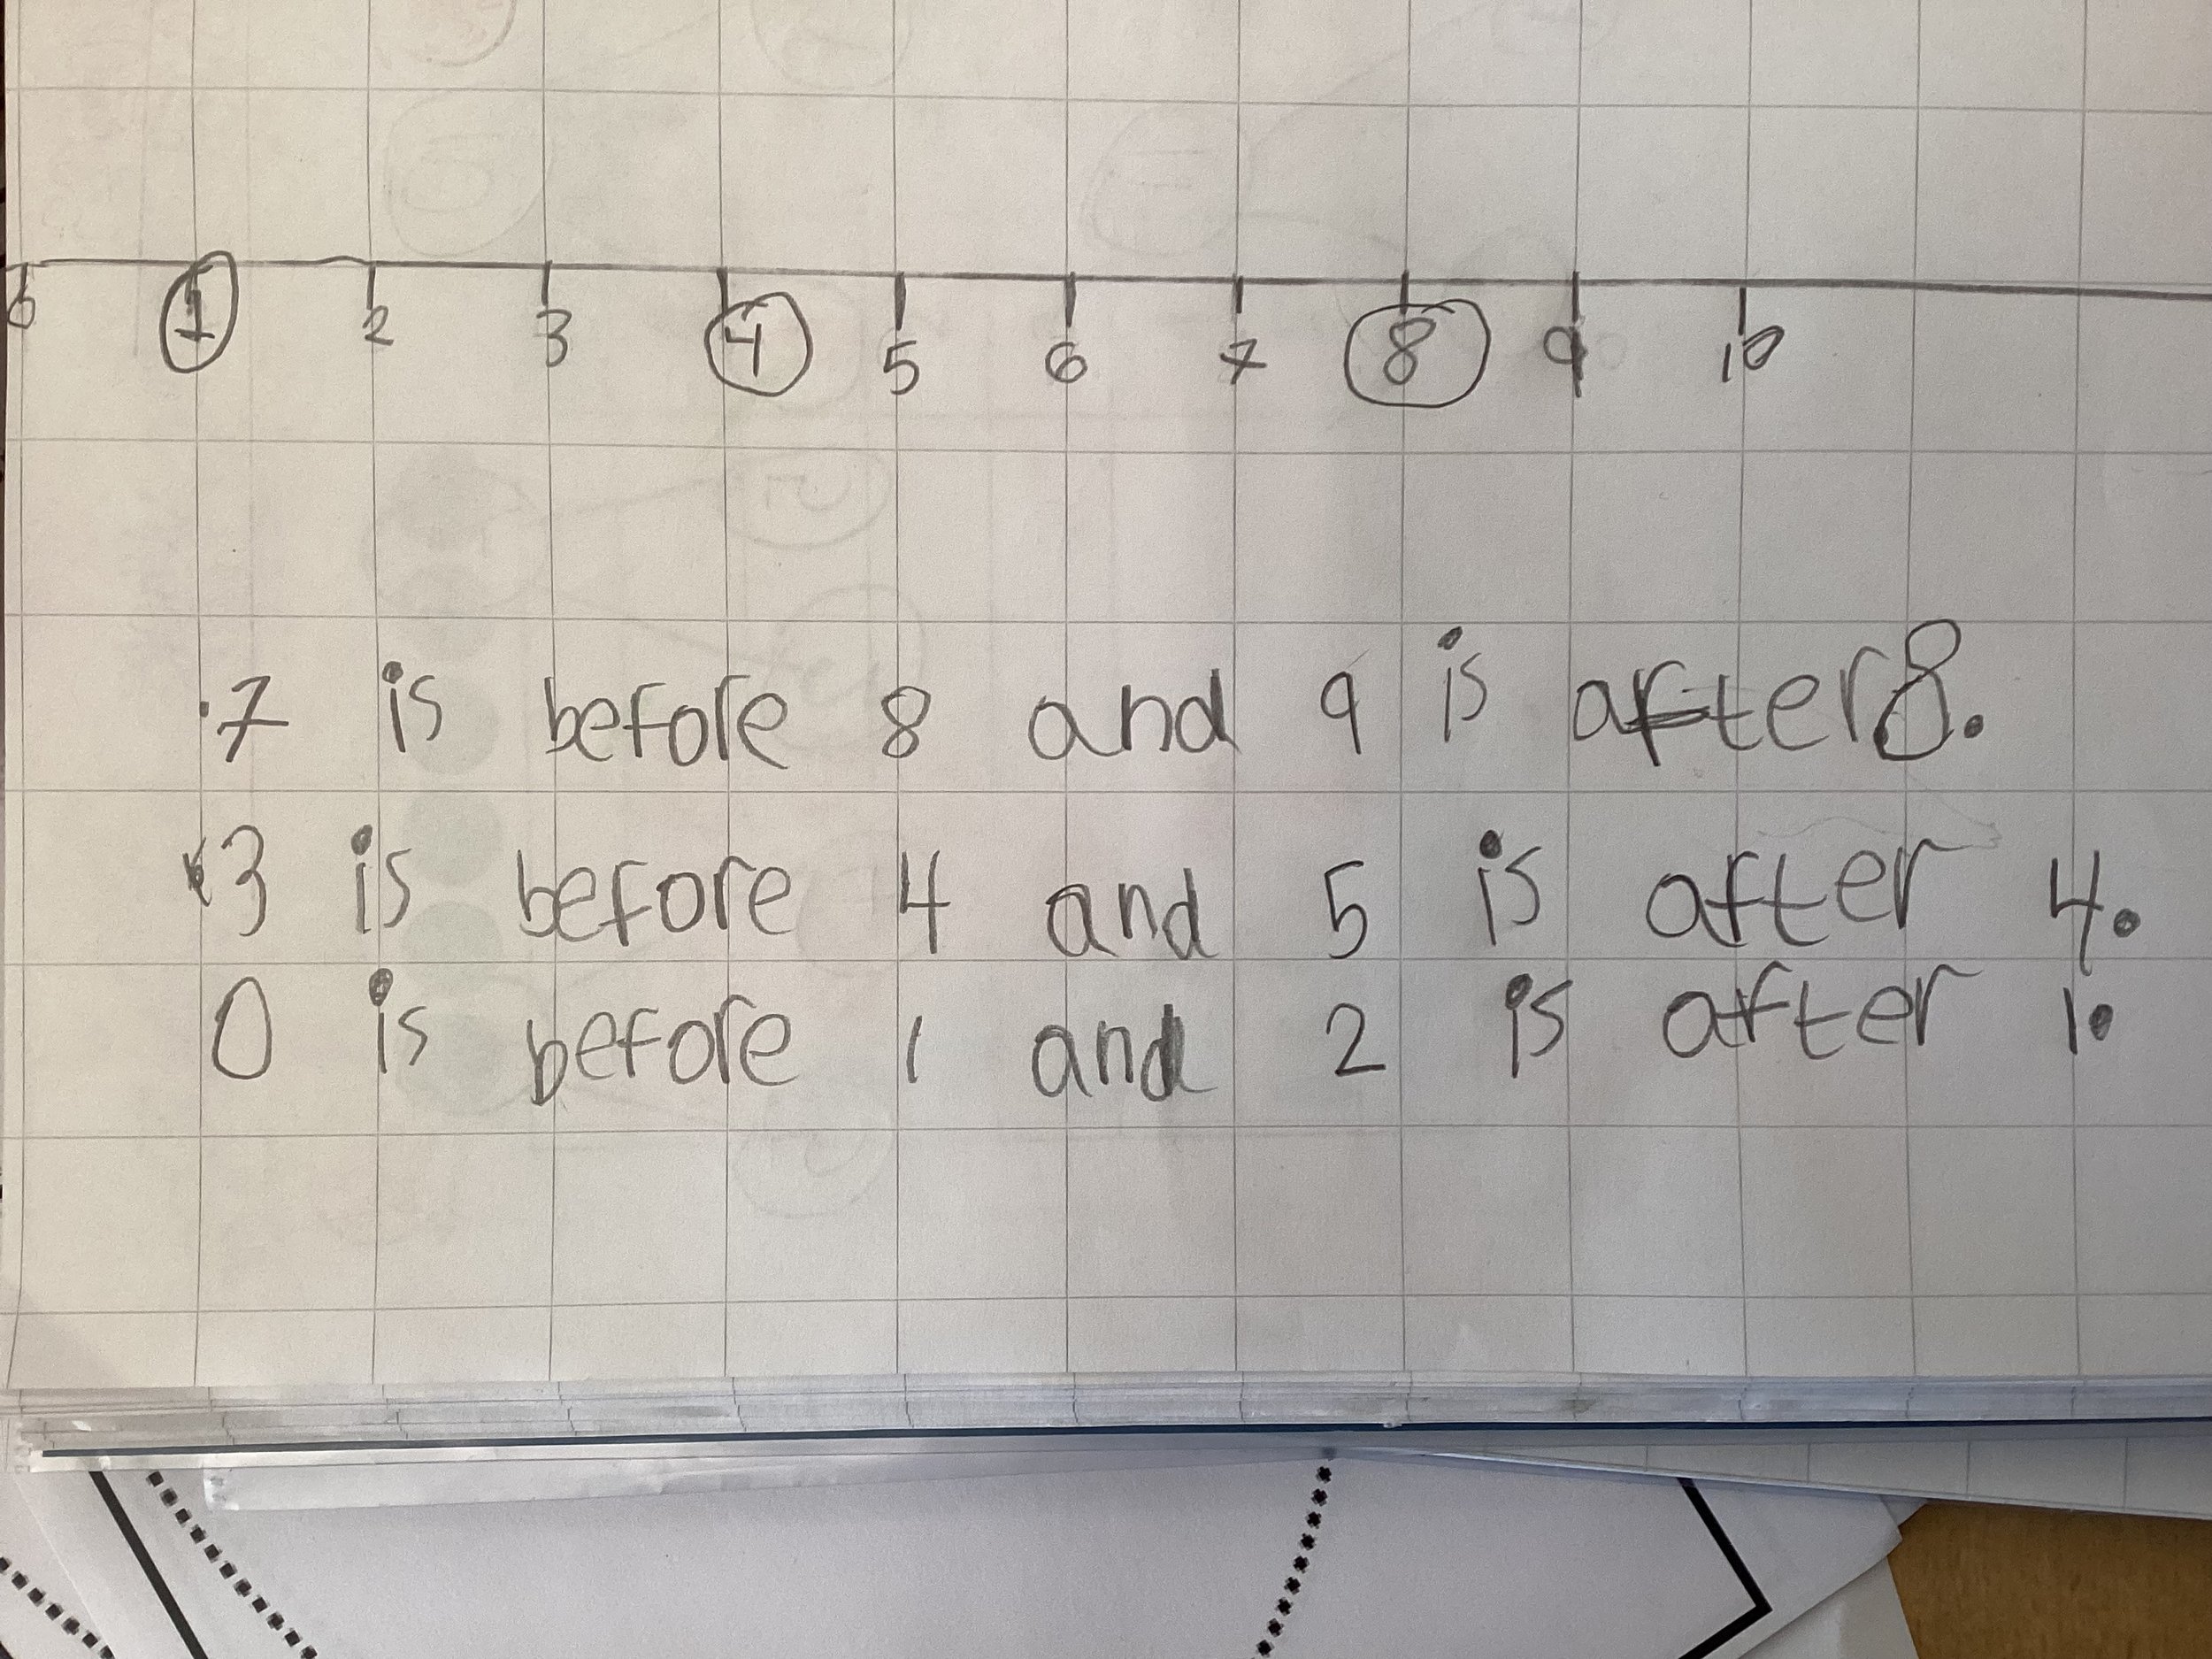 Maths - Number and Ordering!